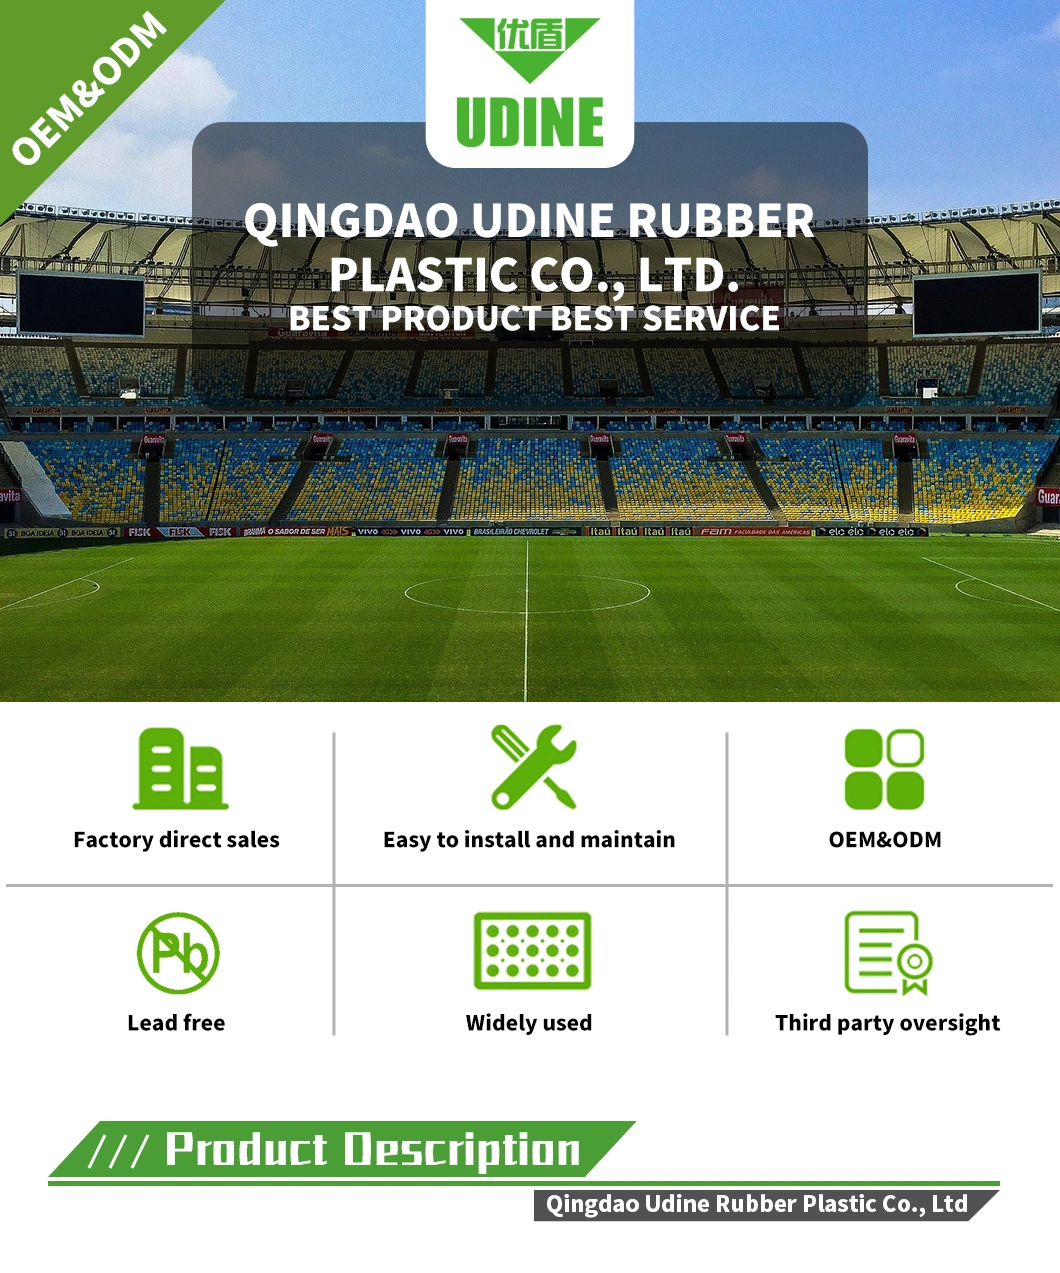 China Wholesale Plastic High Density Sport Artificial Turf Lawn Rugby Fake Synthetic Turf Pet Landscape Grass Football Artificial Turf Manufacturer for Football